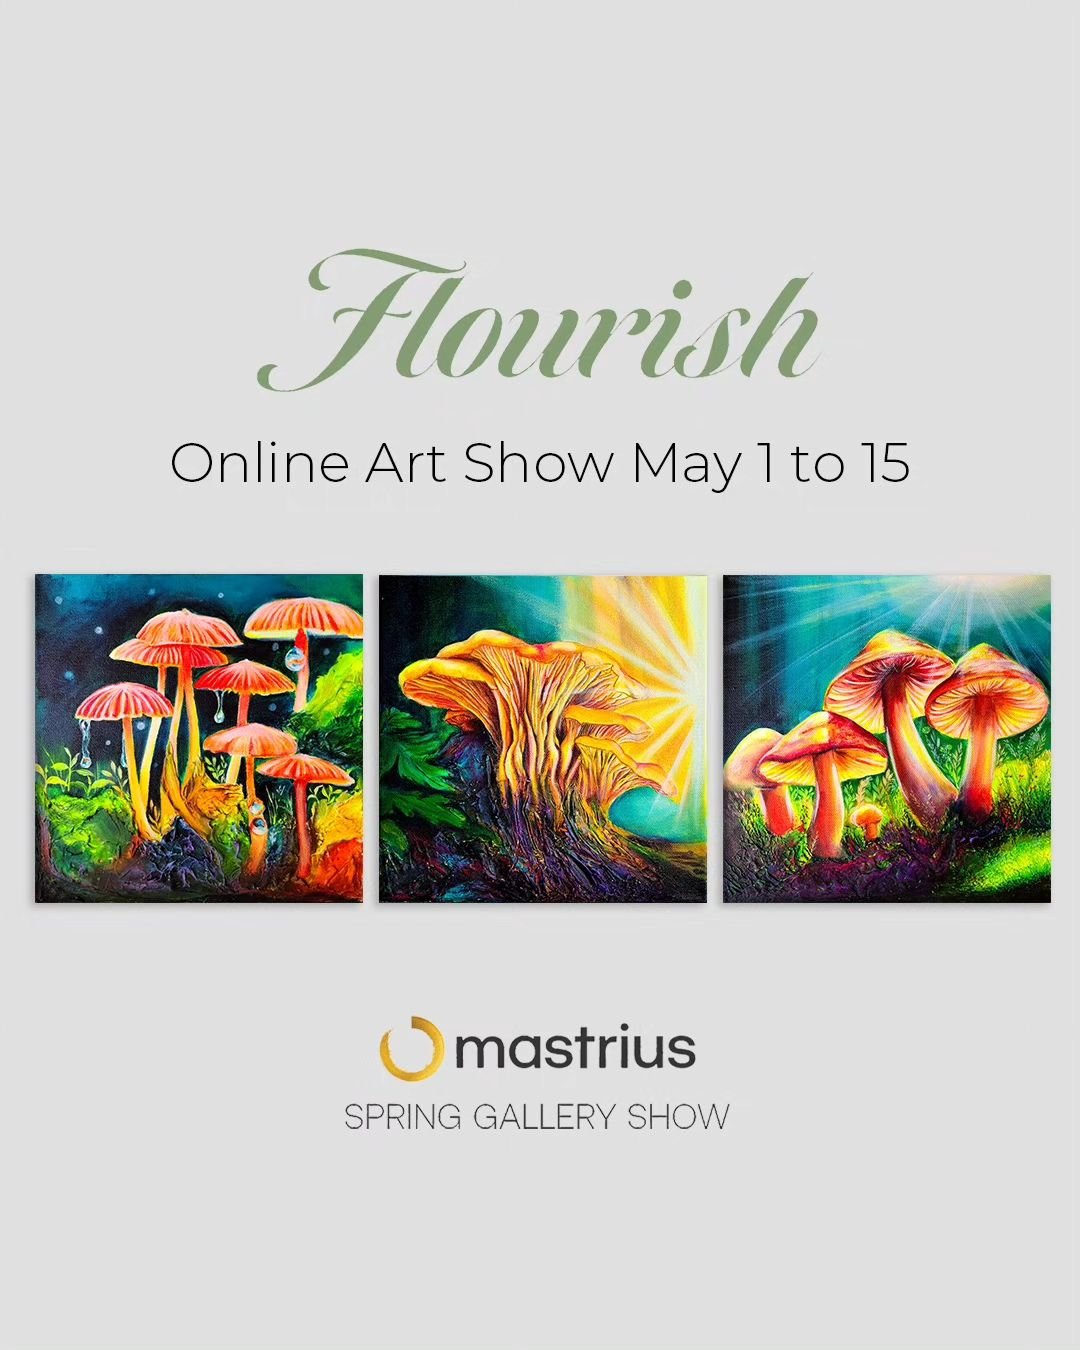 🎉 Hurry up! MOTHER&rsquo;S DAY is almost here! Don&rsquo;t miss out on the chance to get an ORIGINAL artwork for mom

🍄 Only ONE artwork remaining from the enchanting Shroom love collection!

And there are alot of amazing other artworks you can get